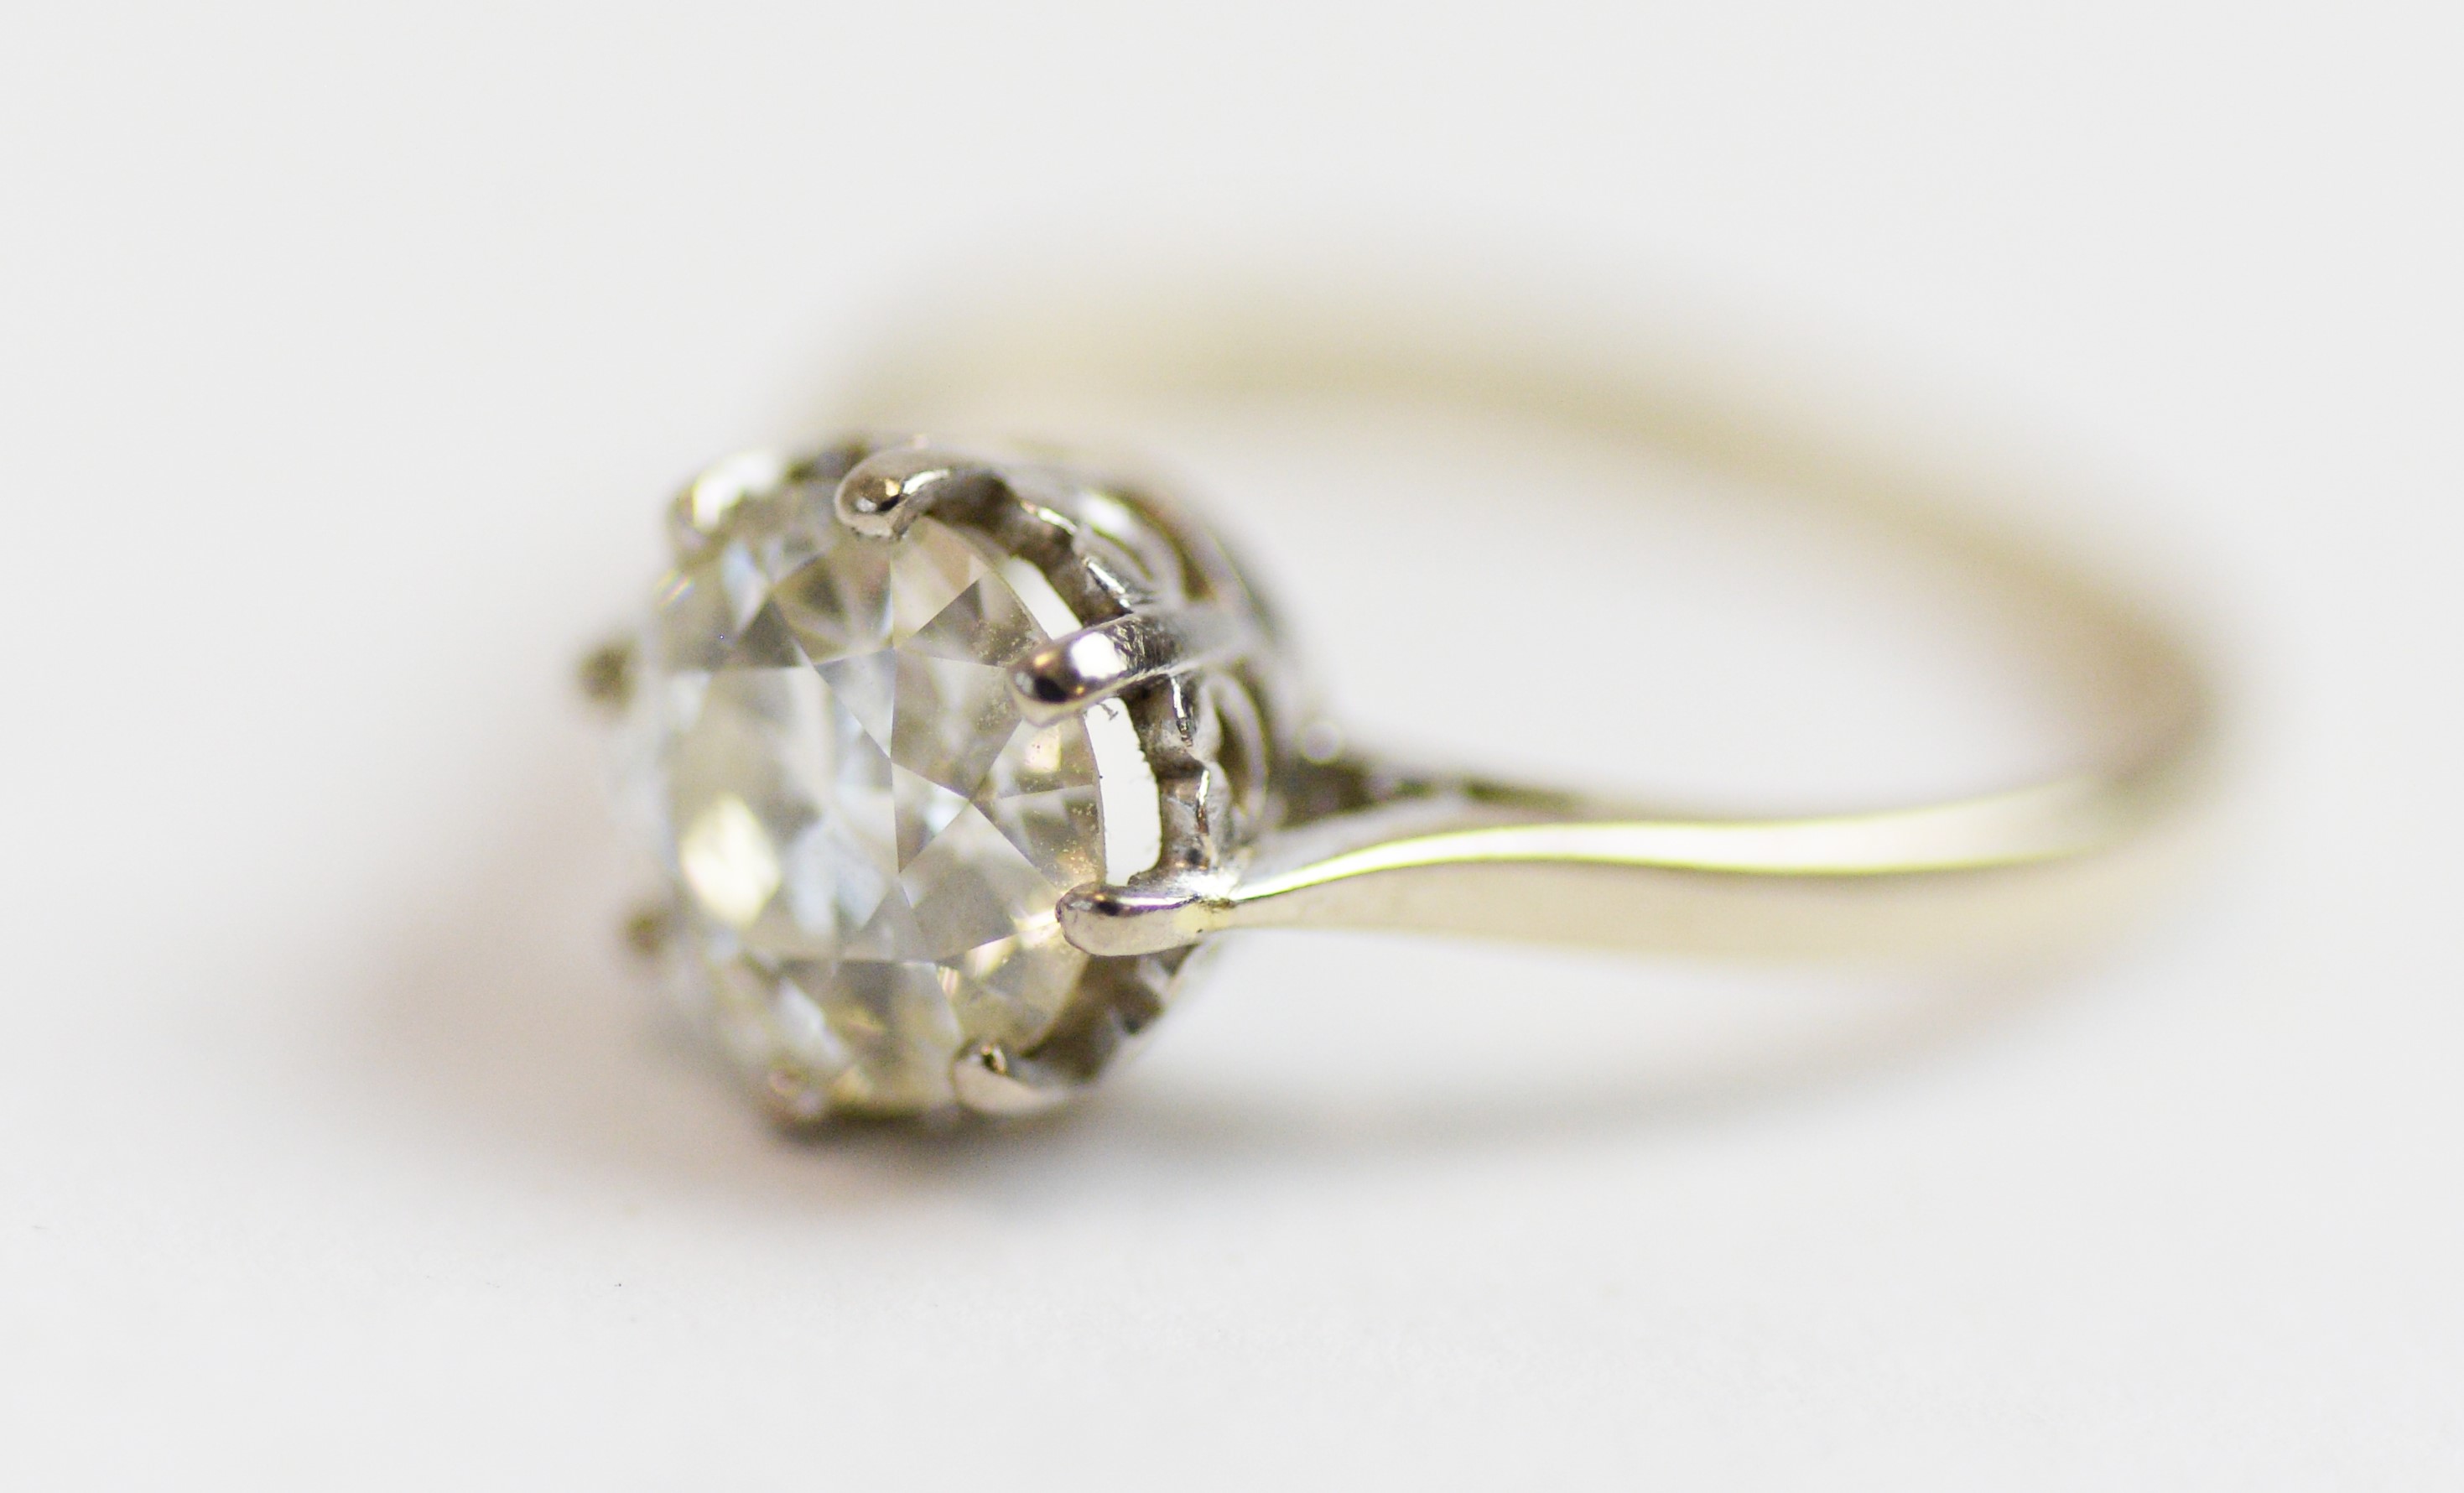 Solitaire diamond ring - Image 4 of 4